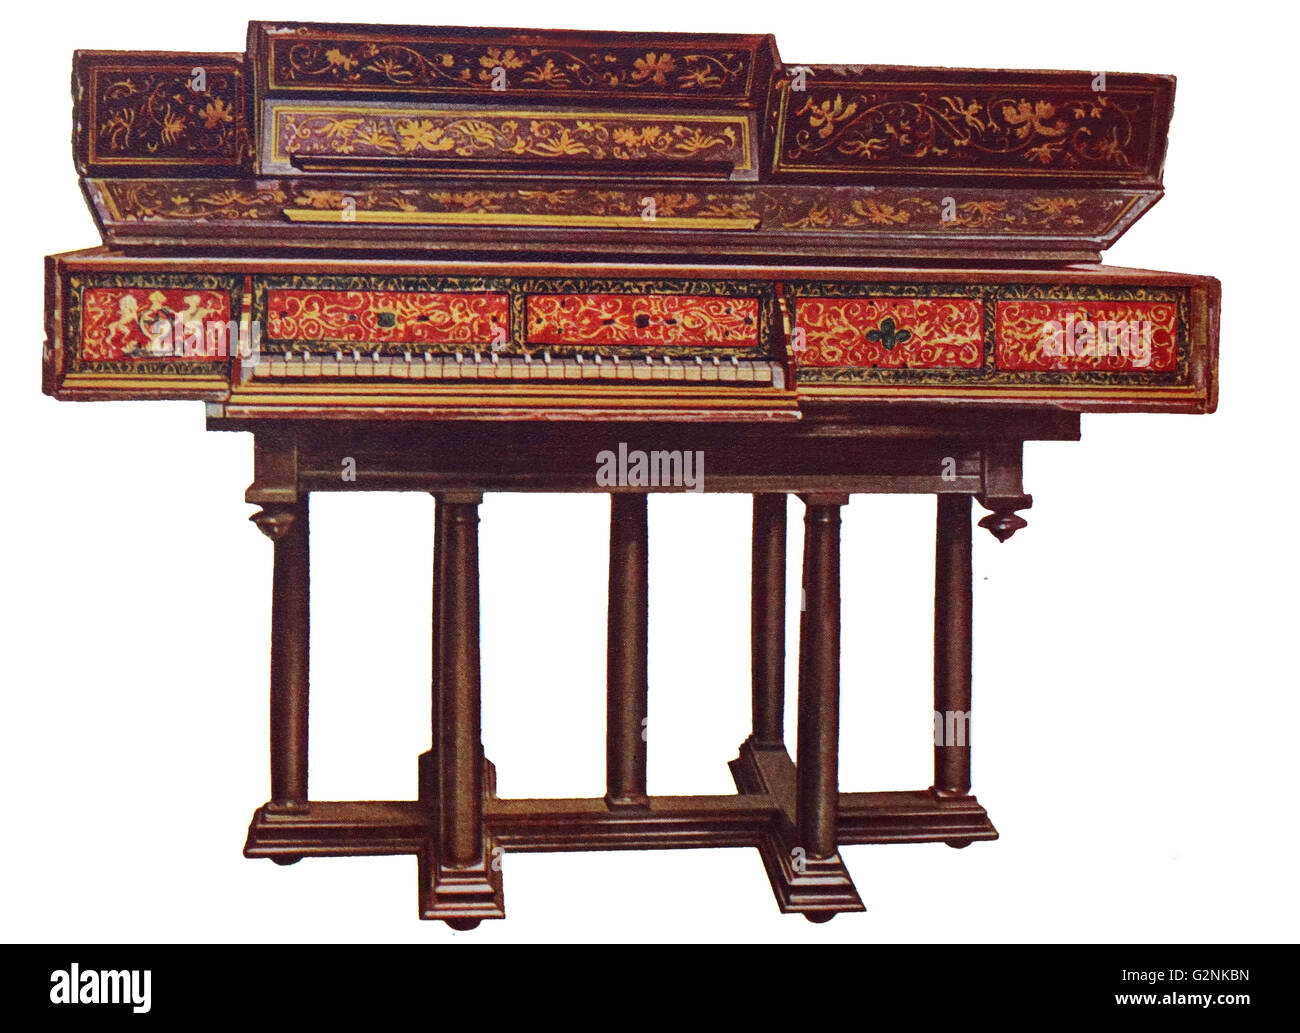 Queen Elizabeth's Virginal. This musical instrument is sitting on a stand and is believed to have belonged to Queen Elizabeth due to her Royal Arms appearing on one side of the keyboard. Stock Photo